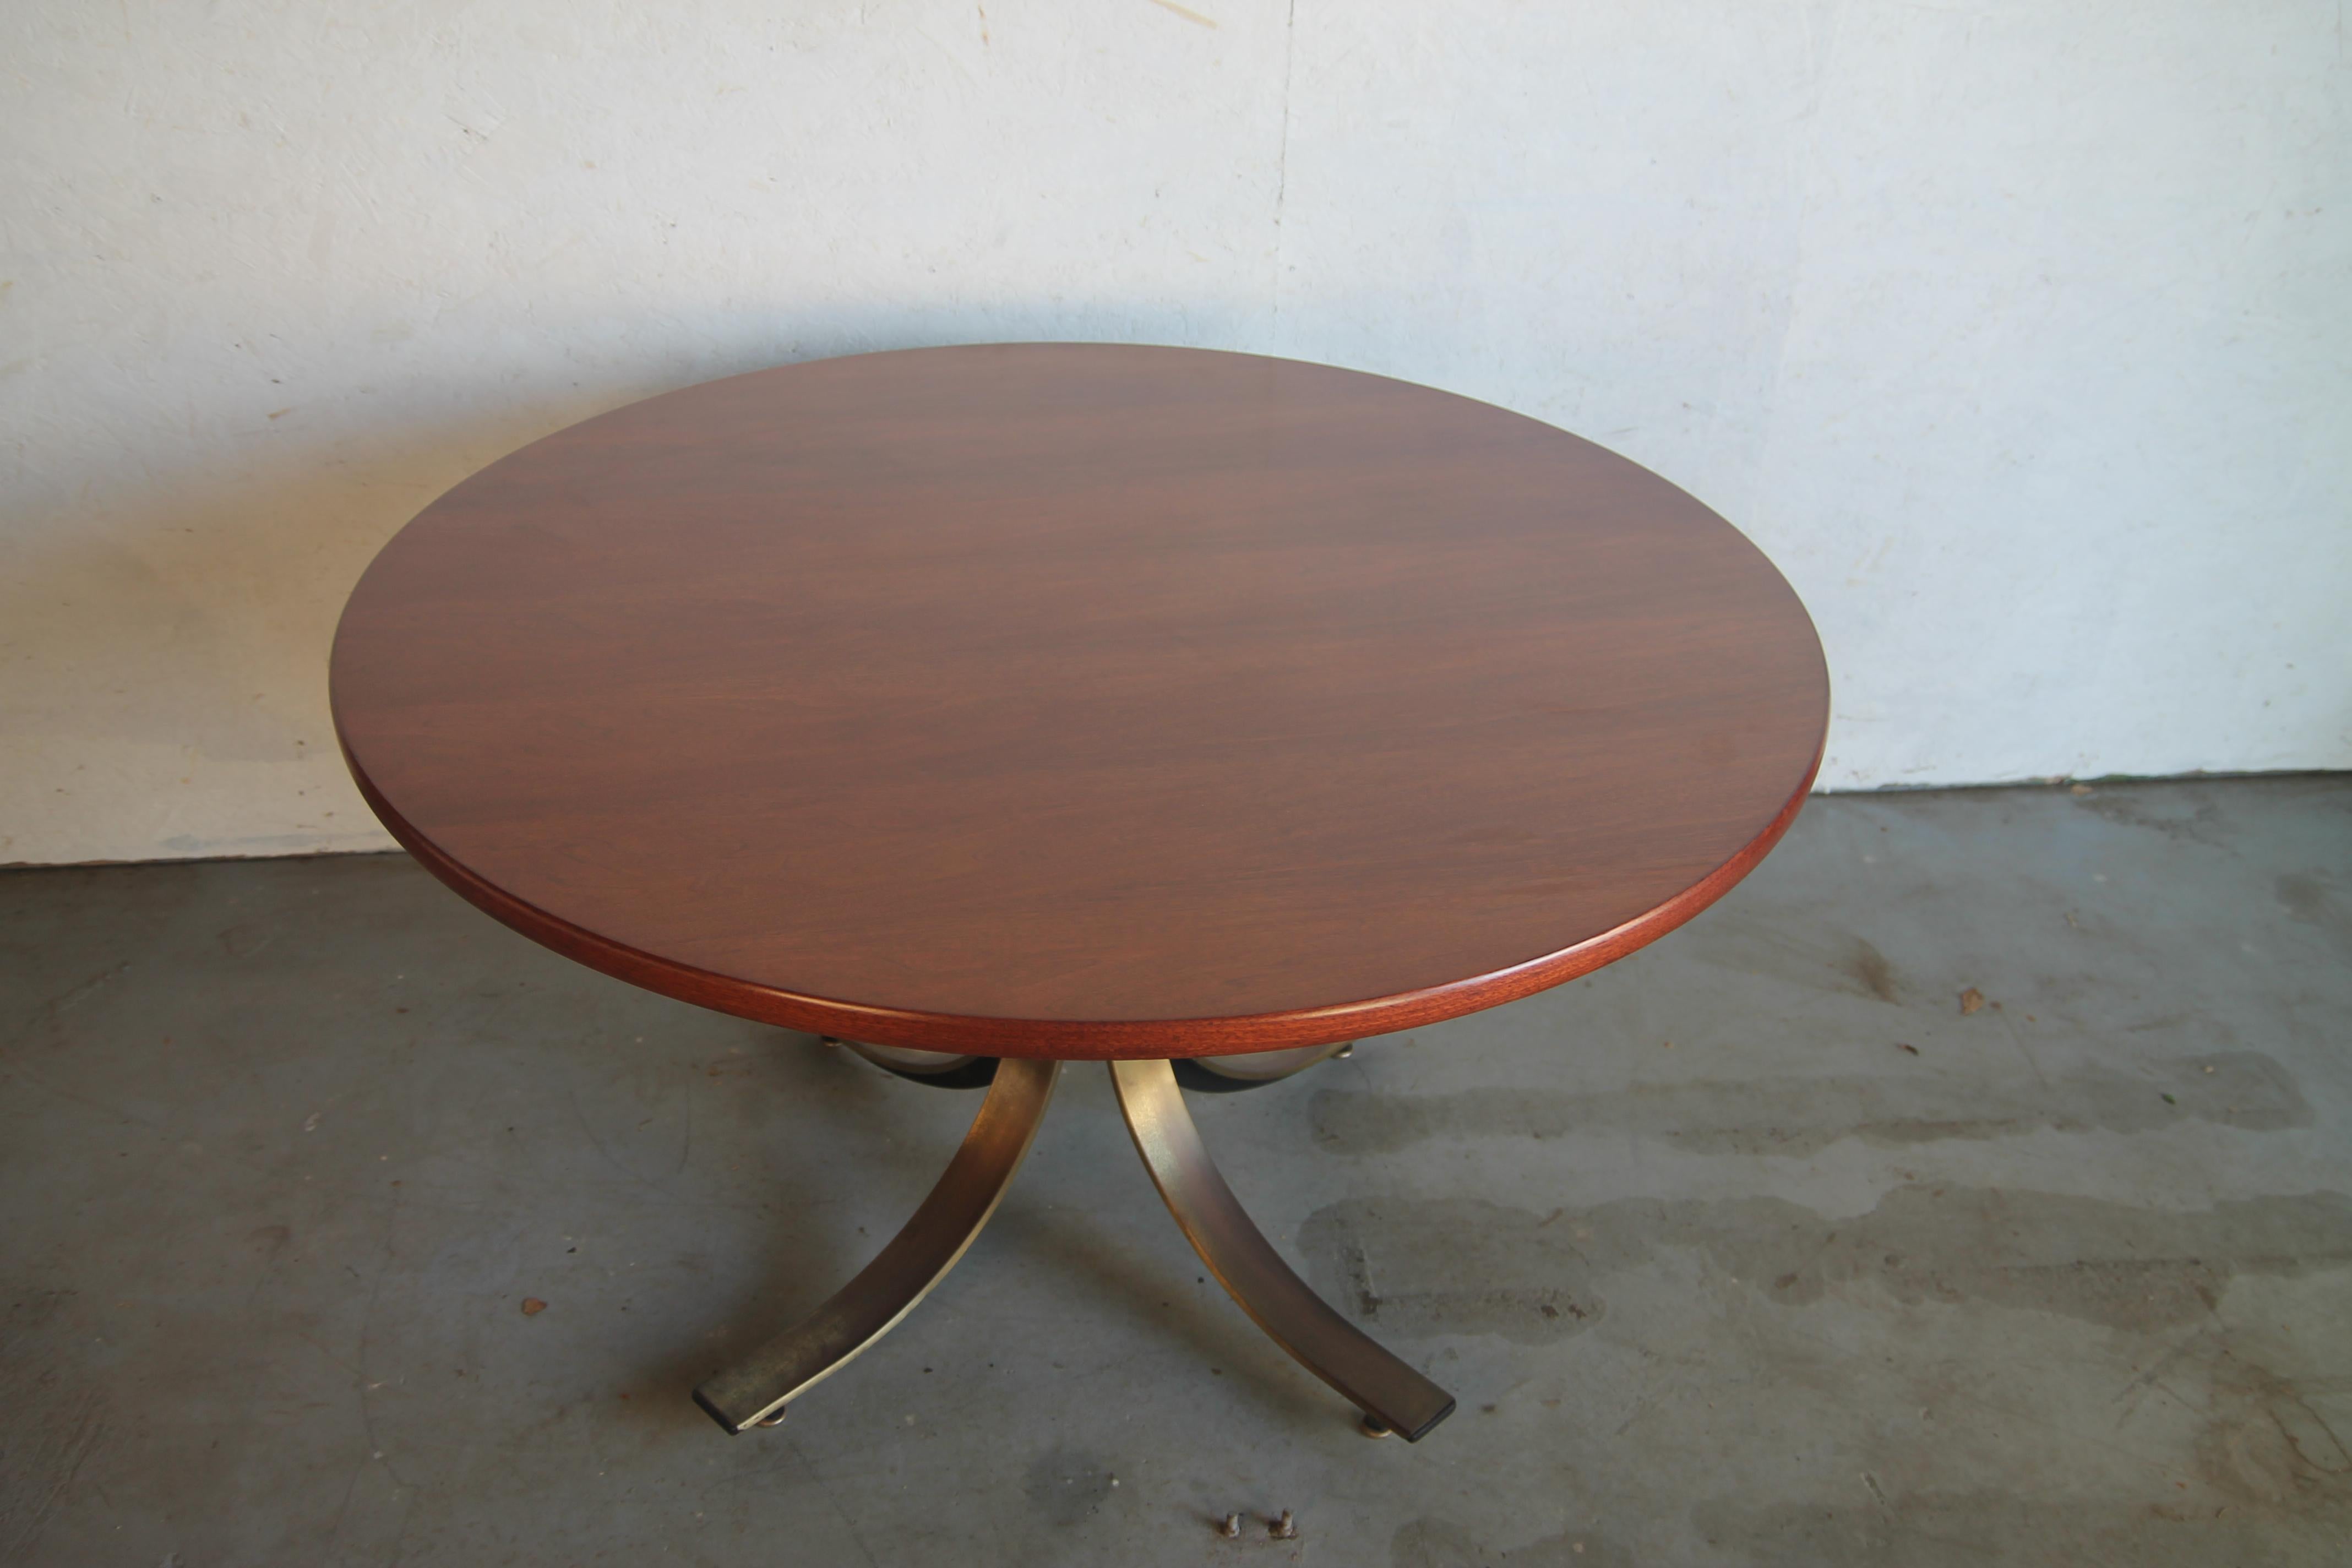 Late 20th Century Round Walnut Top with Brass-Plated Base Table by Stow Davis